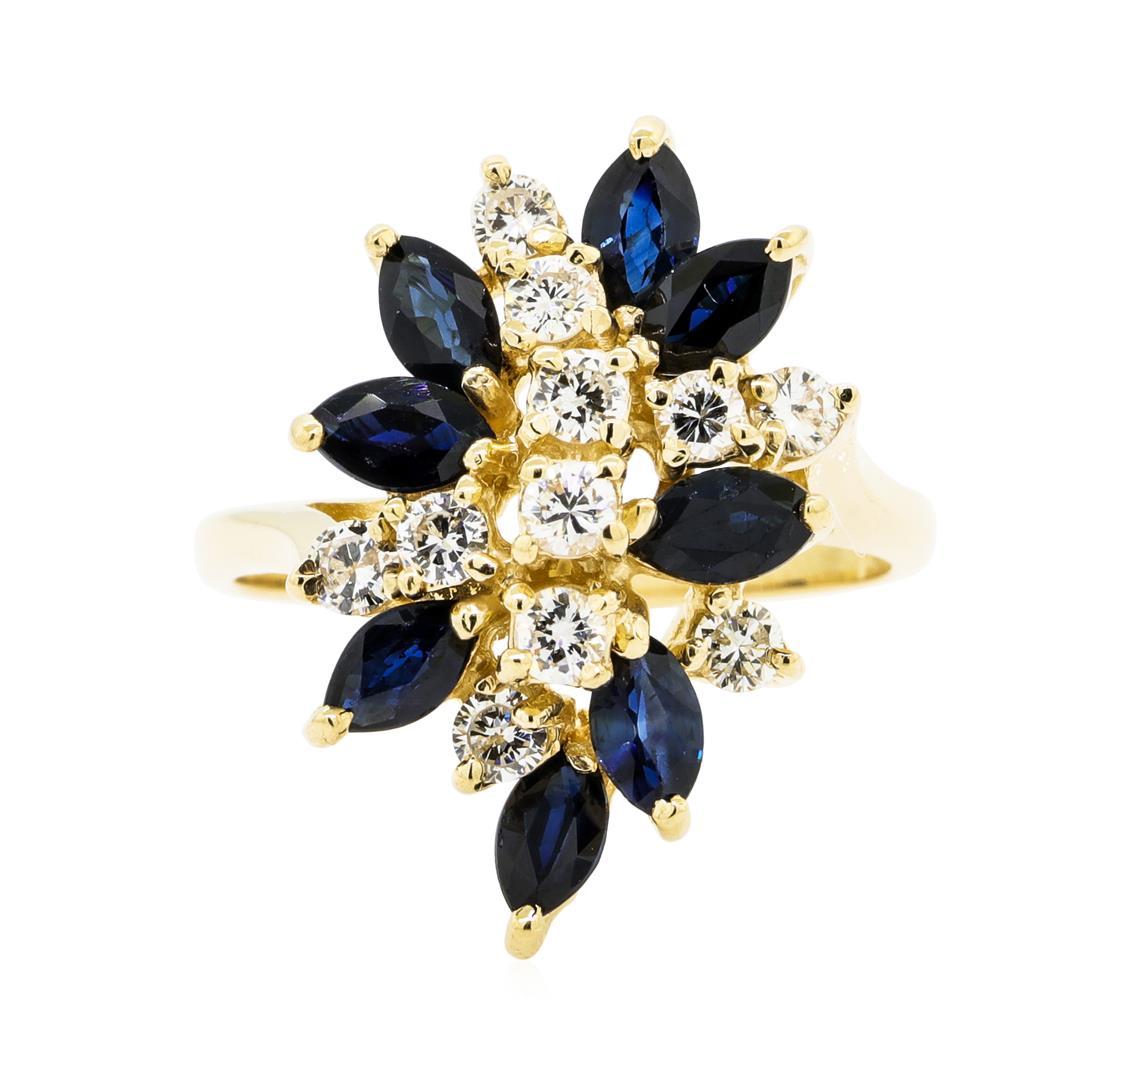 1.20 ctw Sapphire and Diamond Ring - 14KT Yellow Gold